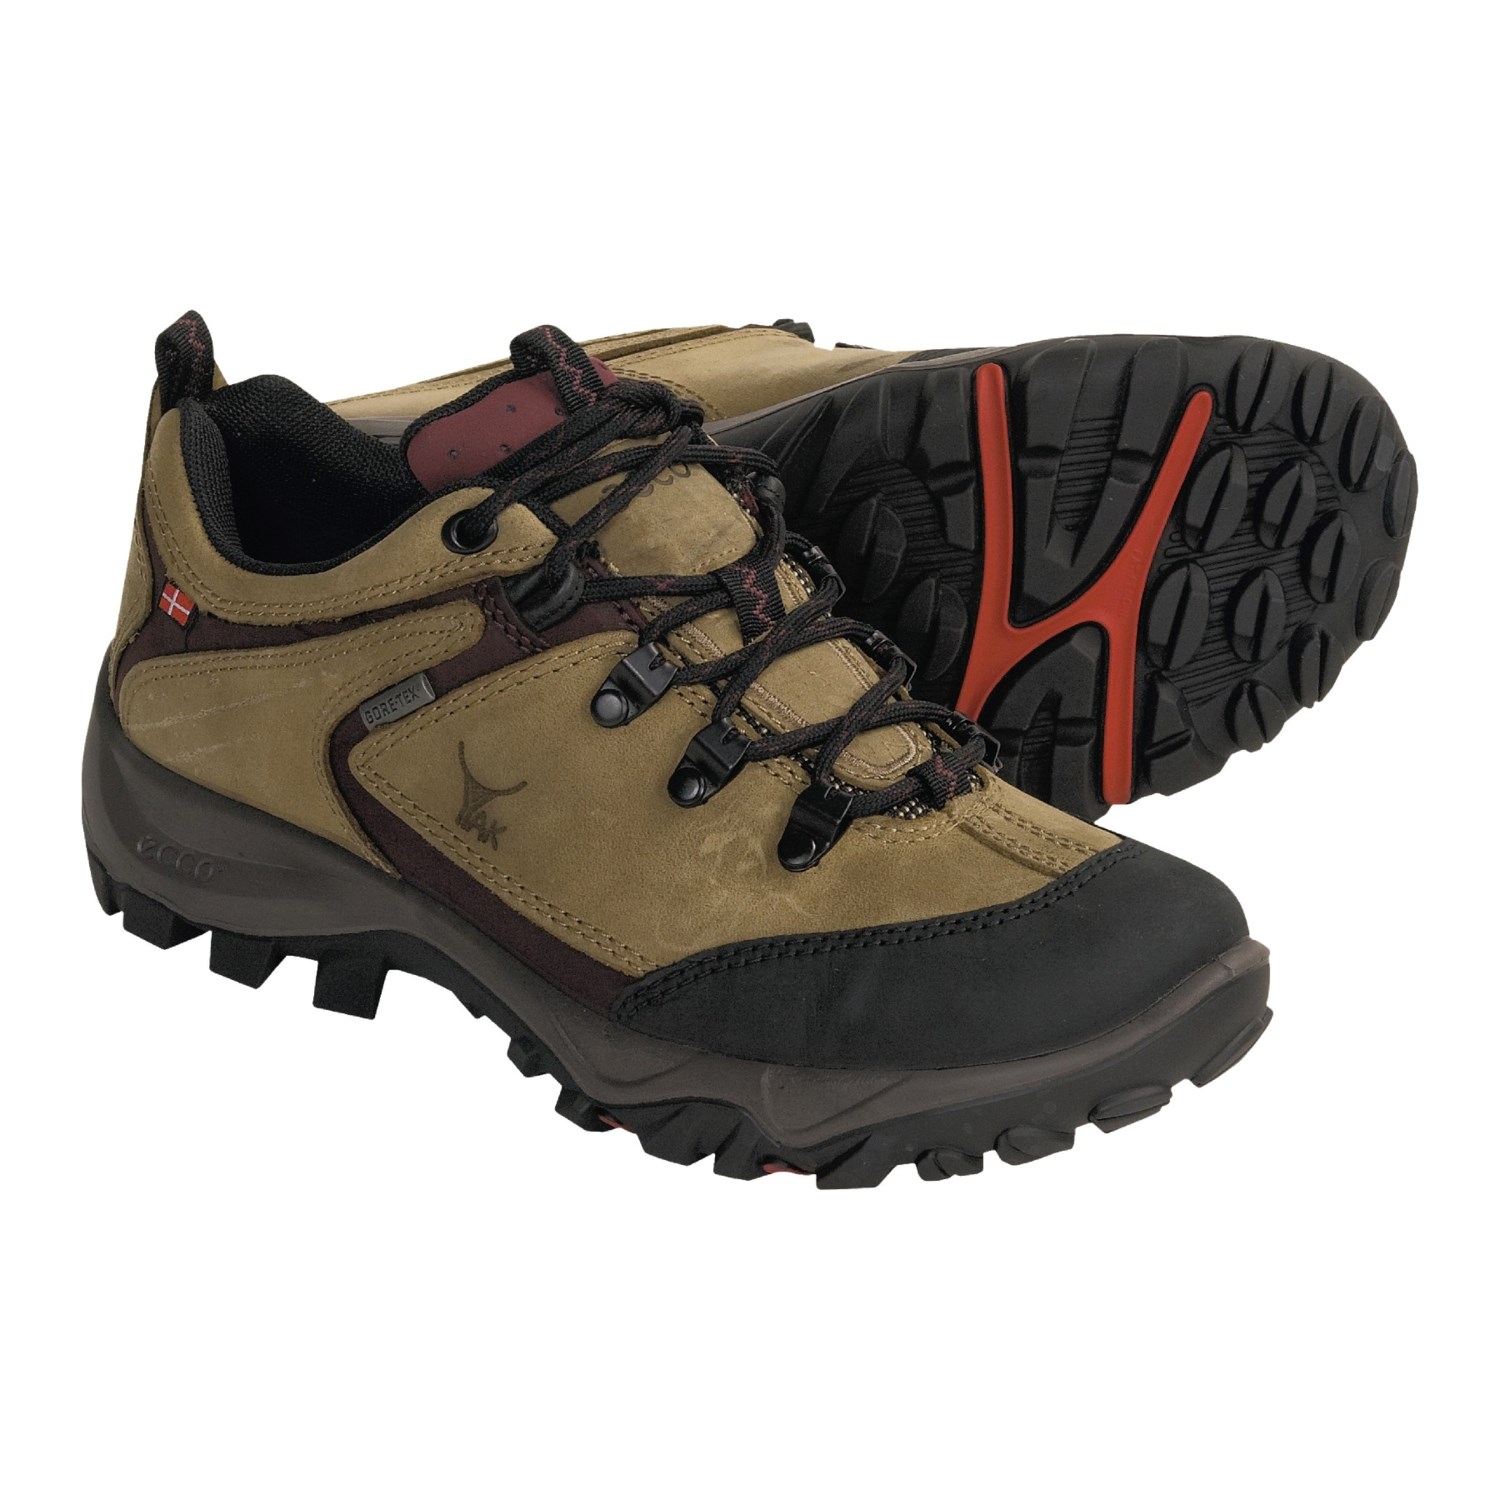 Ecco Xpedition Gore-Tex® Hiking Shoes (For Women) 2170U - Save 35%